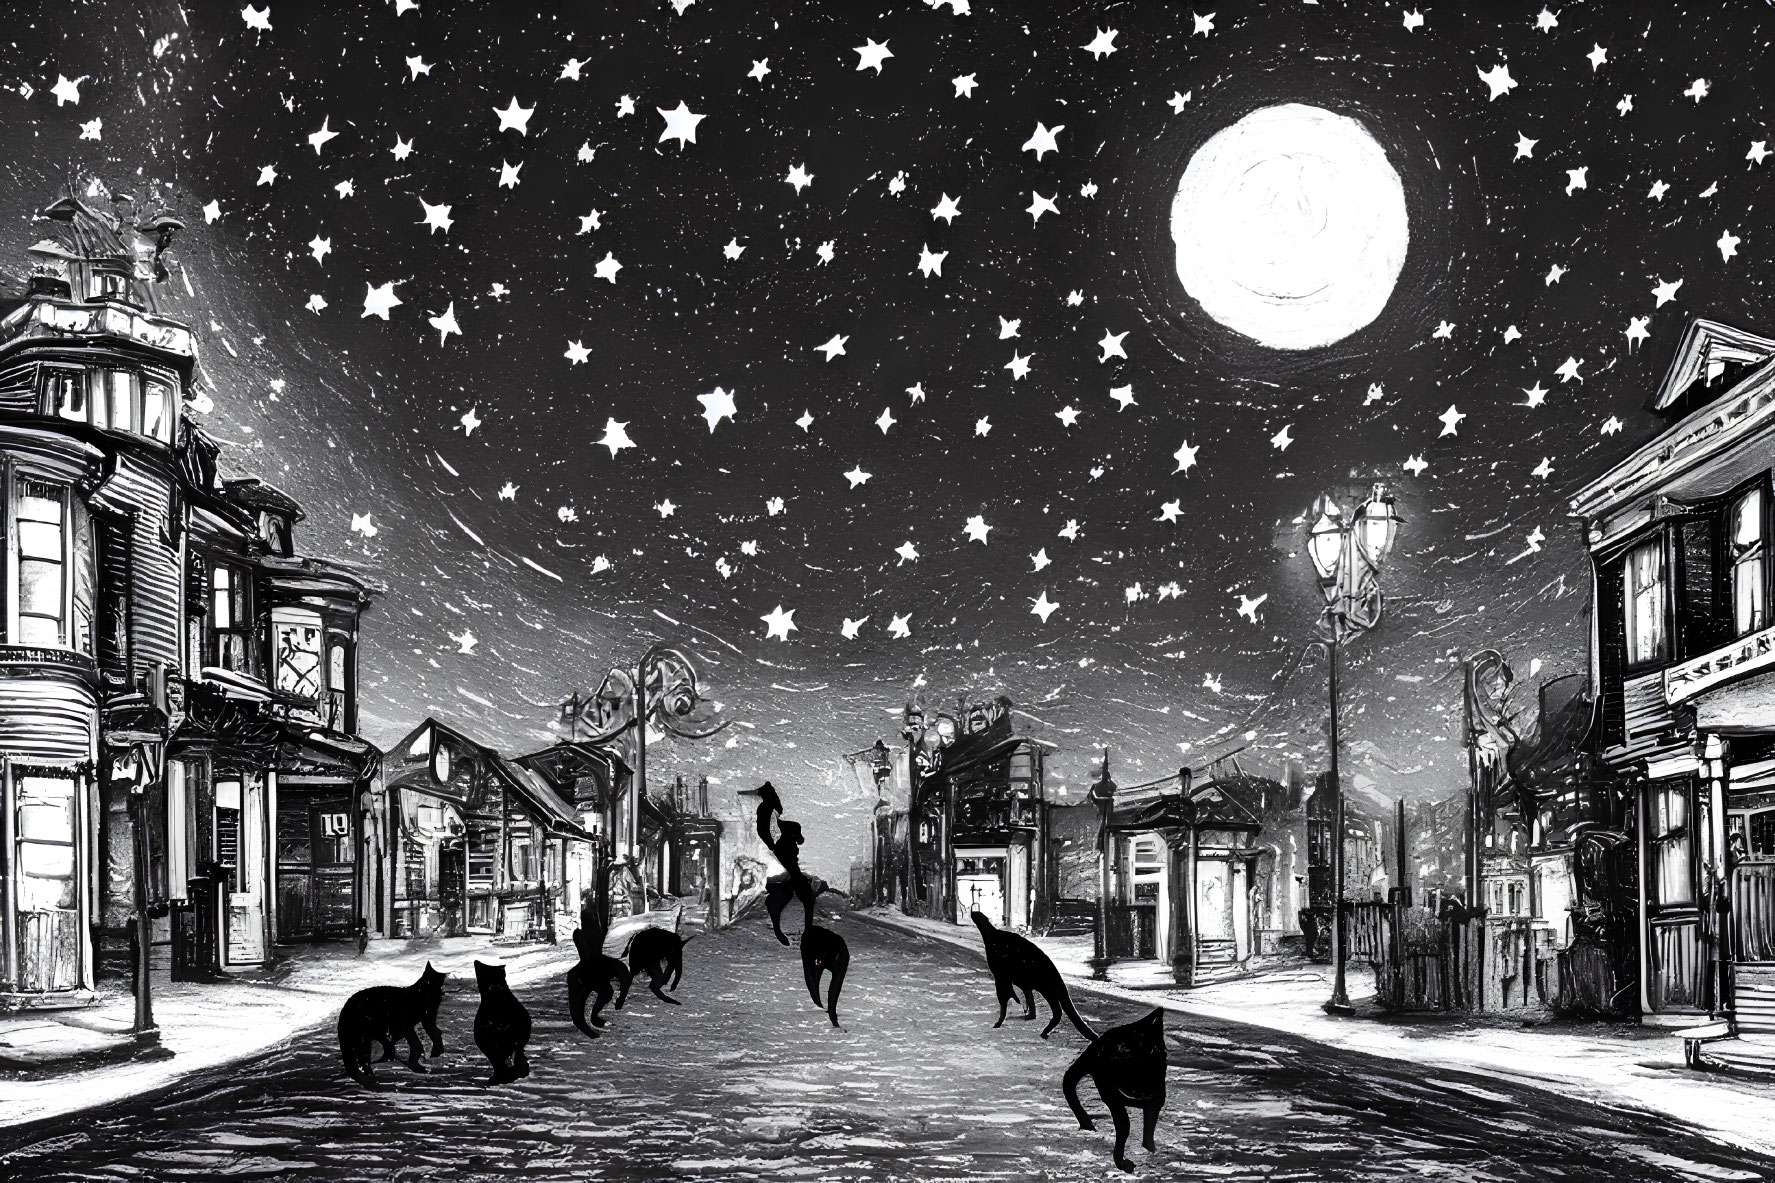 Monochrome whimsical night scene with moon, stars, animals, and Victorian-era buildings